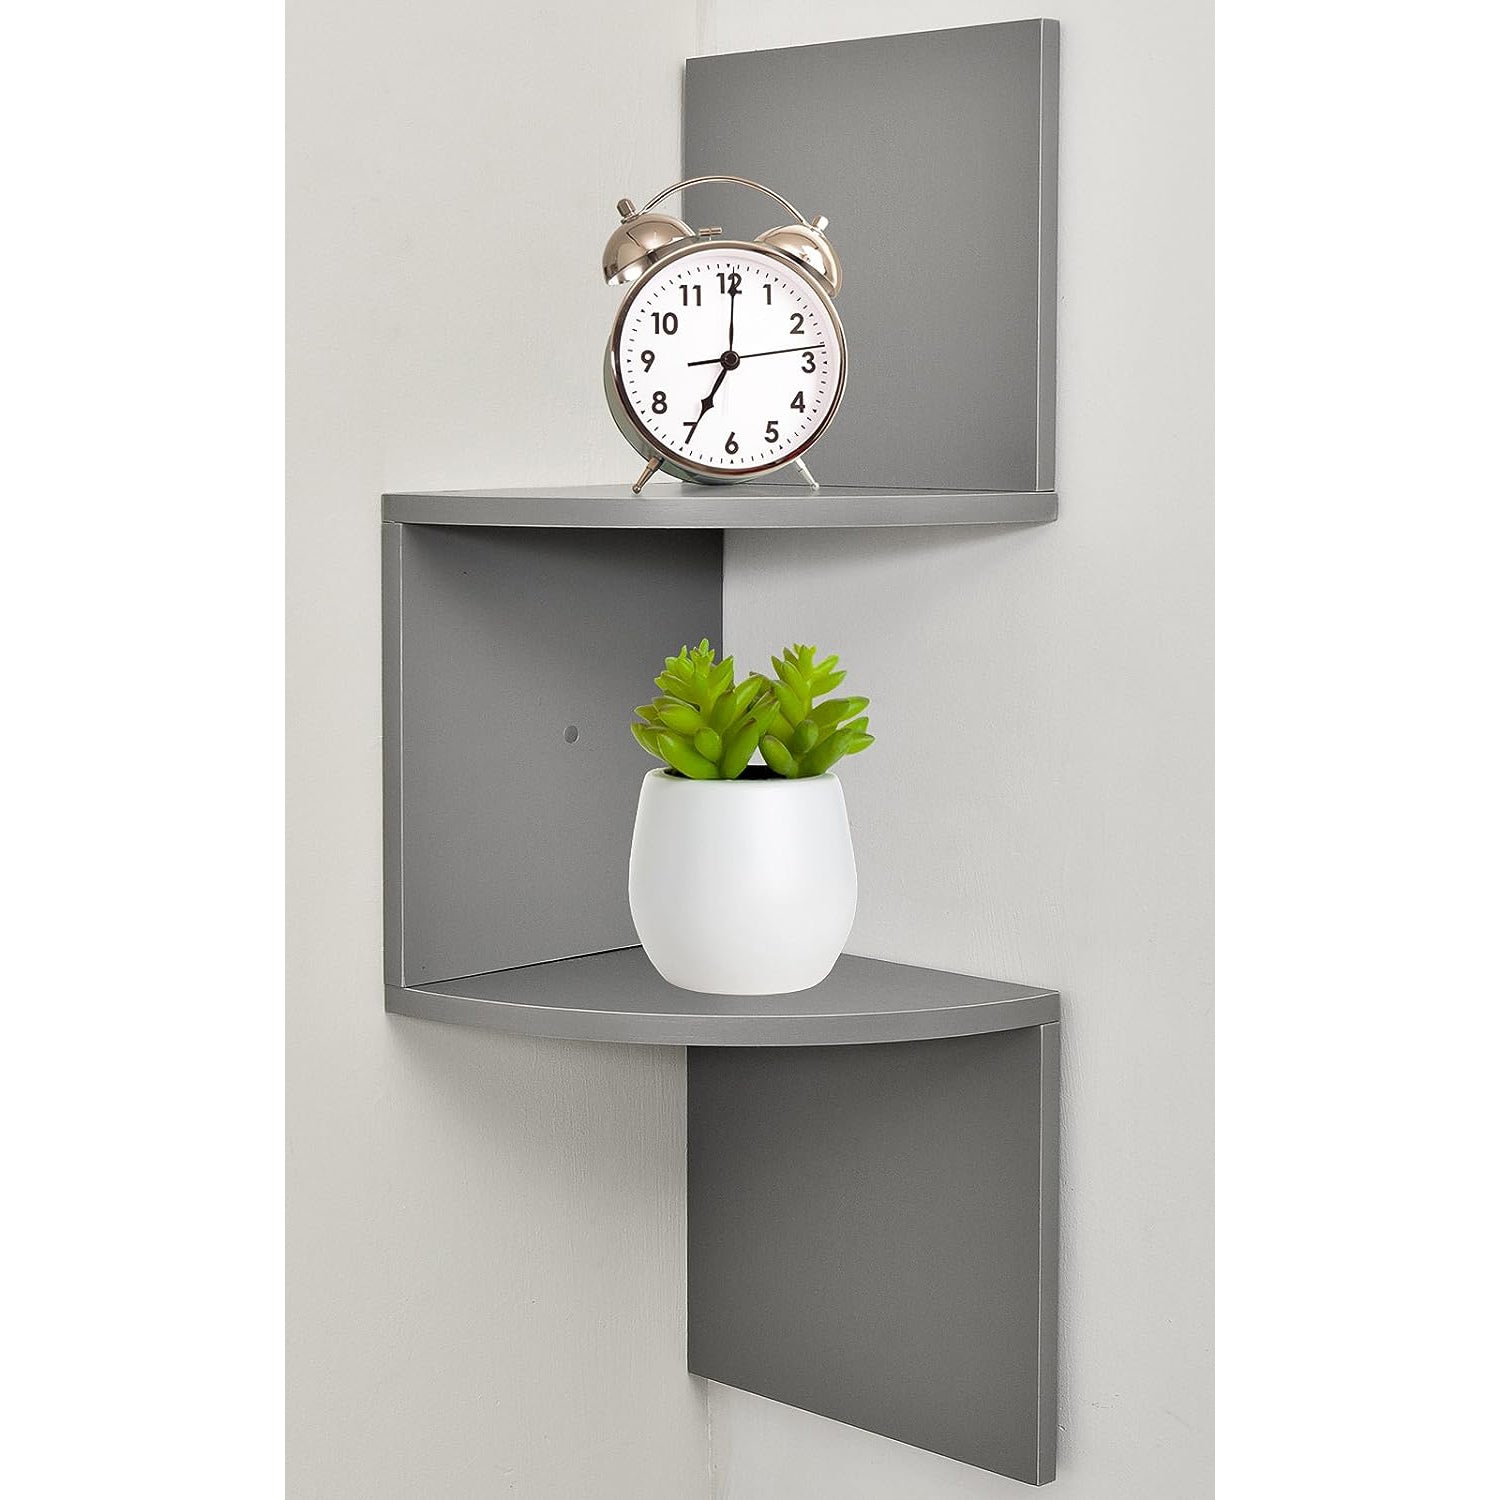 Dream Lifestyle Wall Mounted Floating Shelves, Creative Plastic